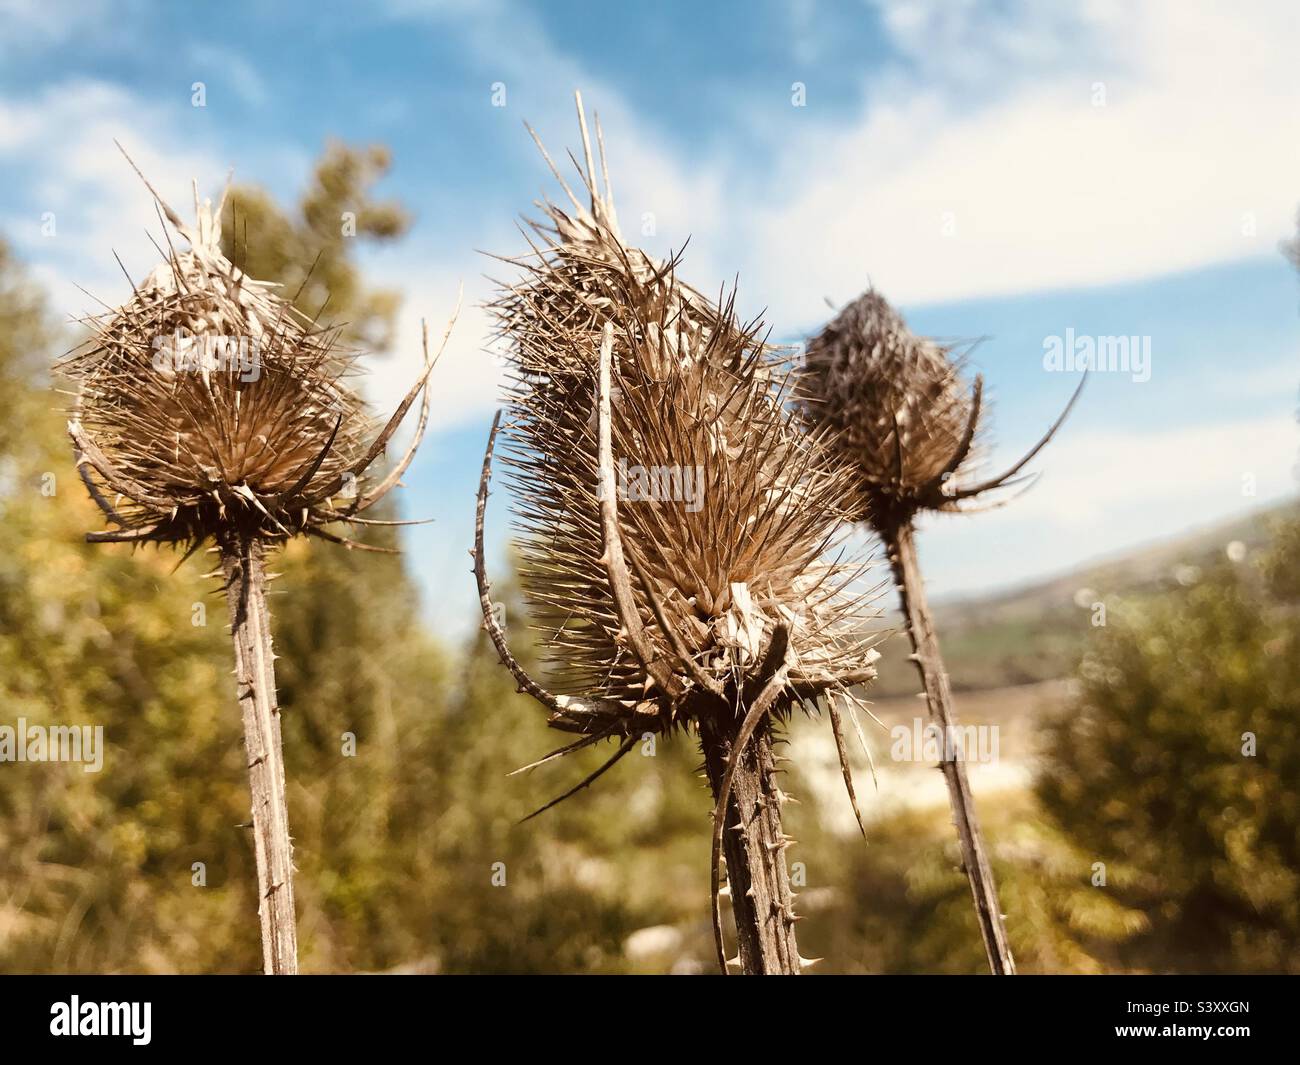 dry flowers in the background, blurred nature Stock Photo